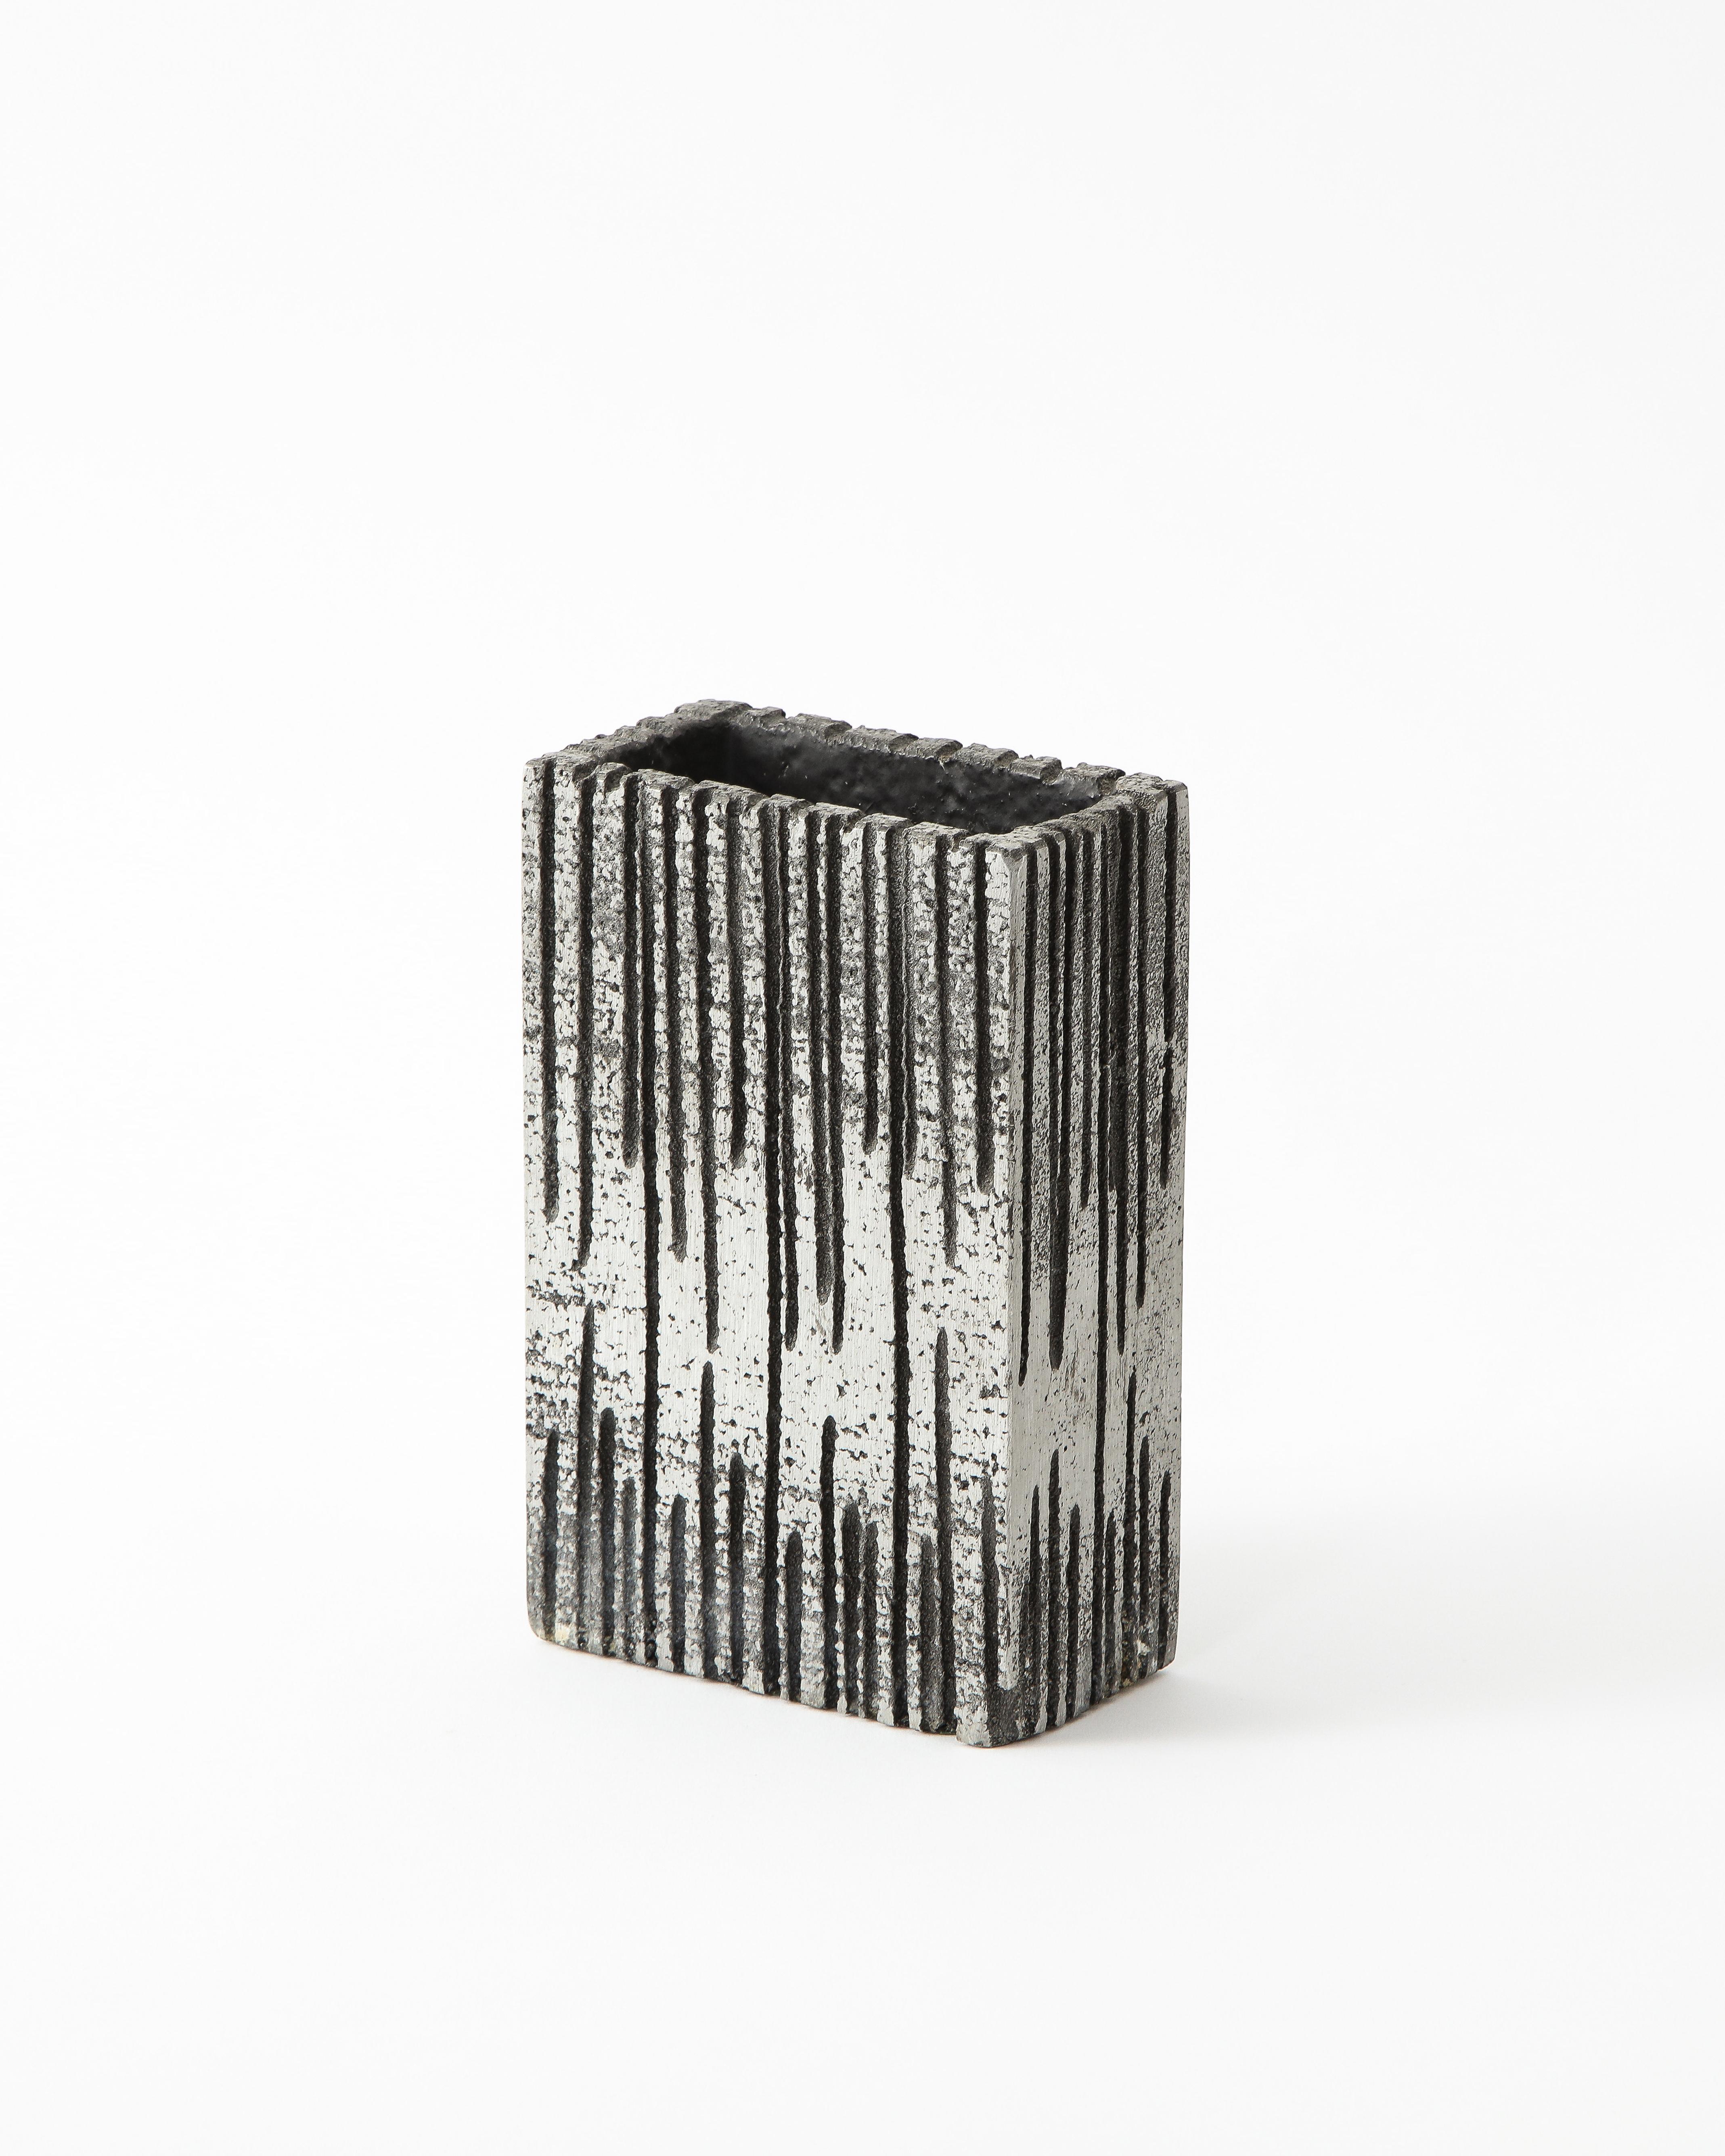 Brutalist Striated Rectangular Metallic Vase in Light Silver In Good Condition For Sale In New York, NY